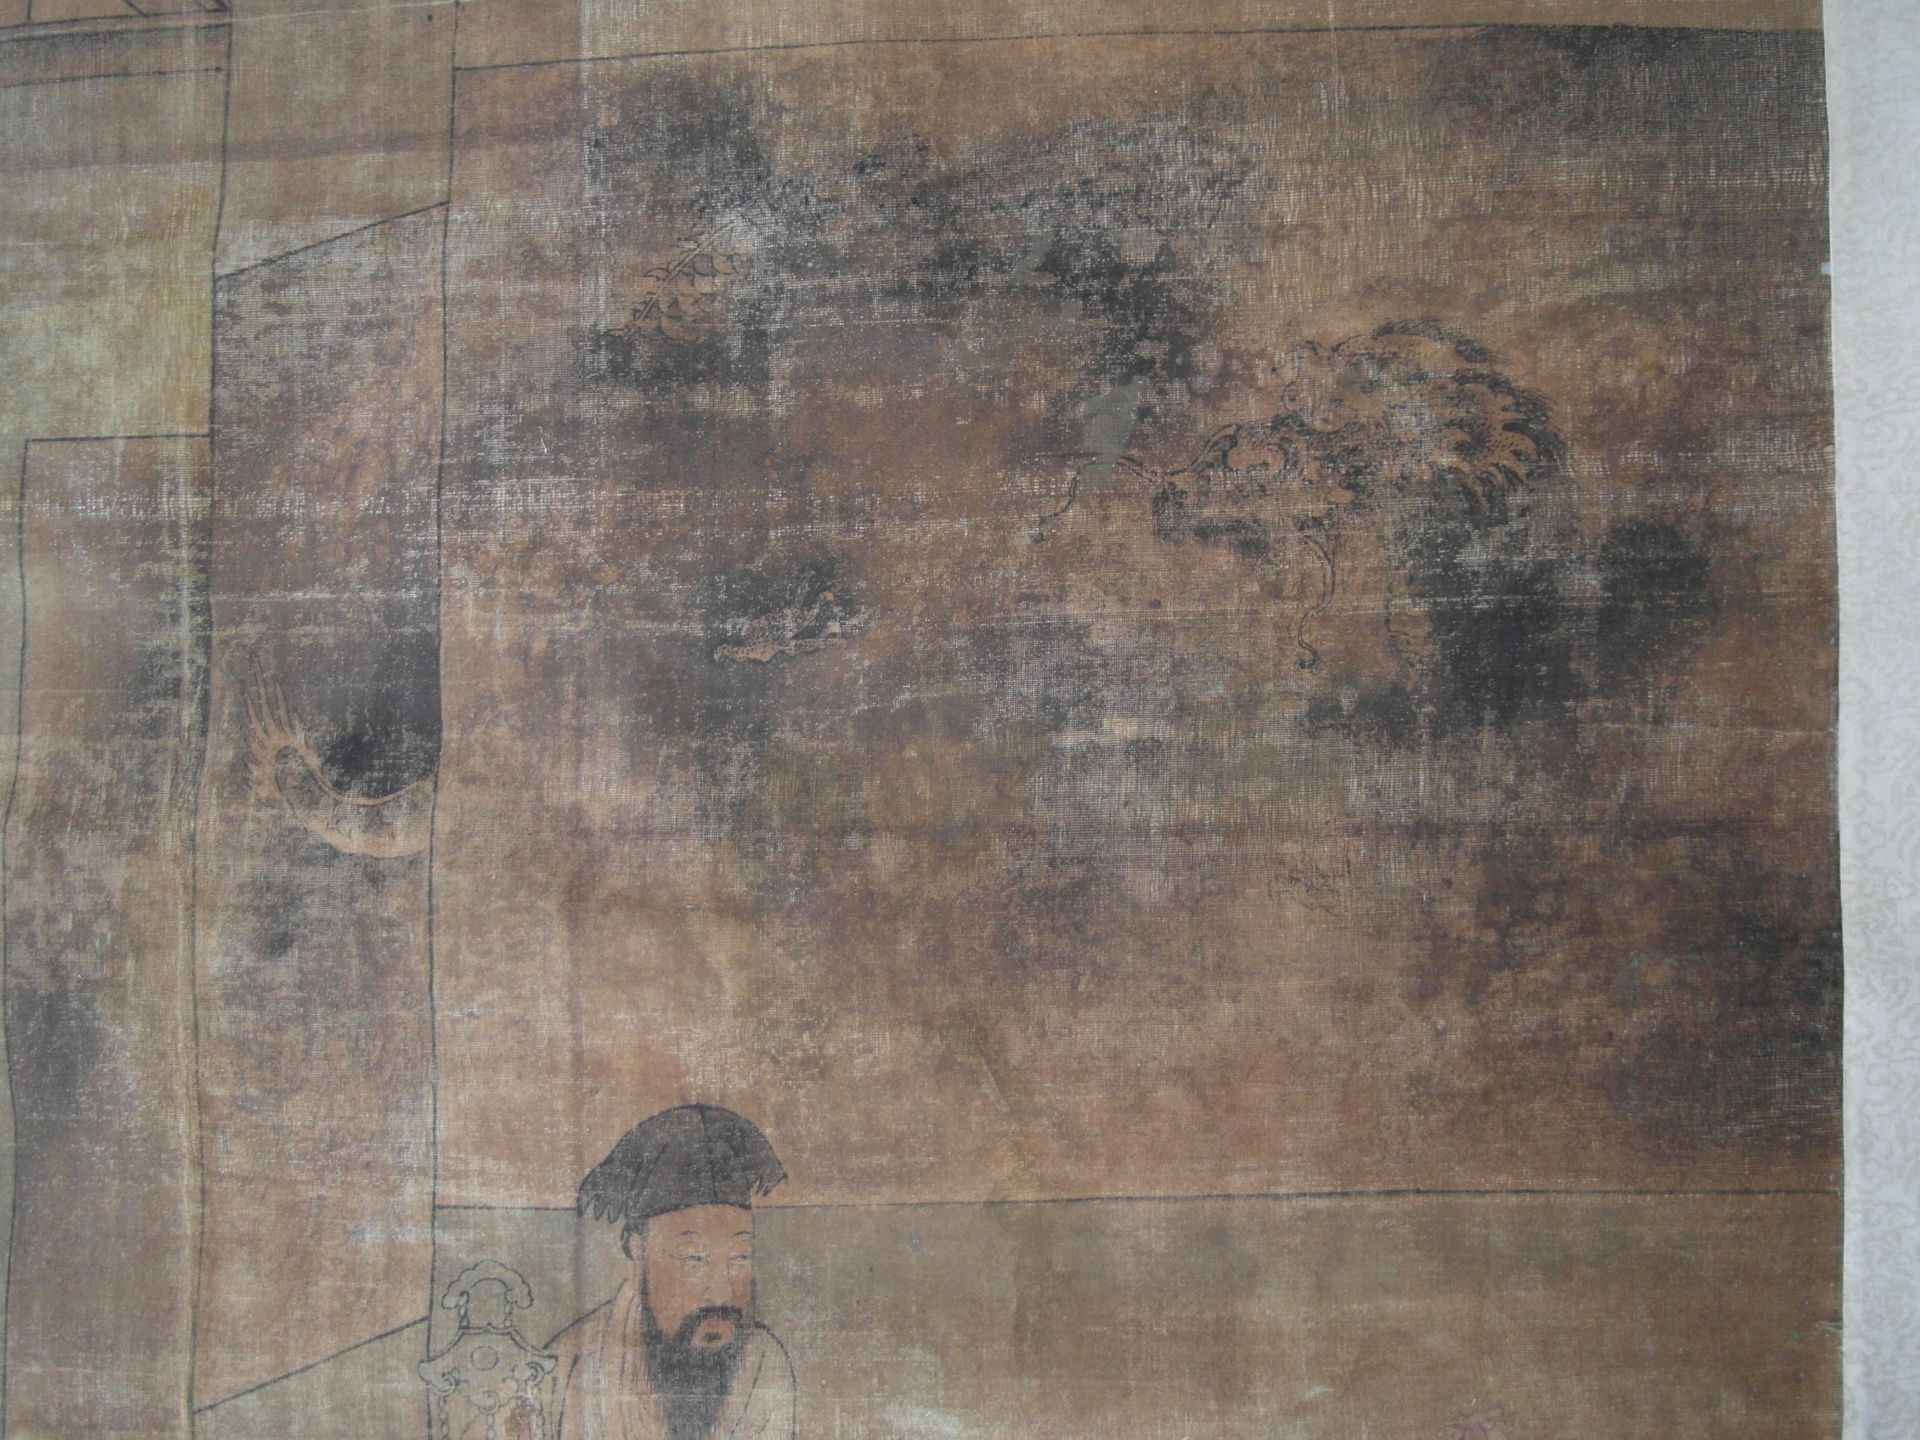 ZHANG, CHONGMing painter, active in the 17th cSCHOLARS APPRAISING ANTIQUES AND ART. Origin: China. - Bild 11 aus 17